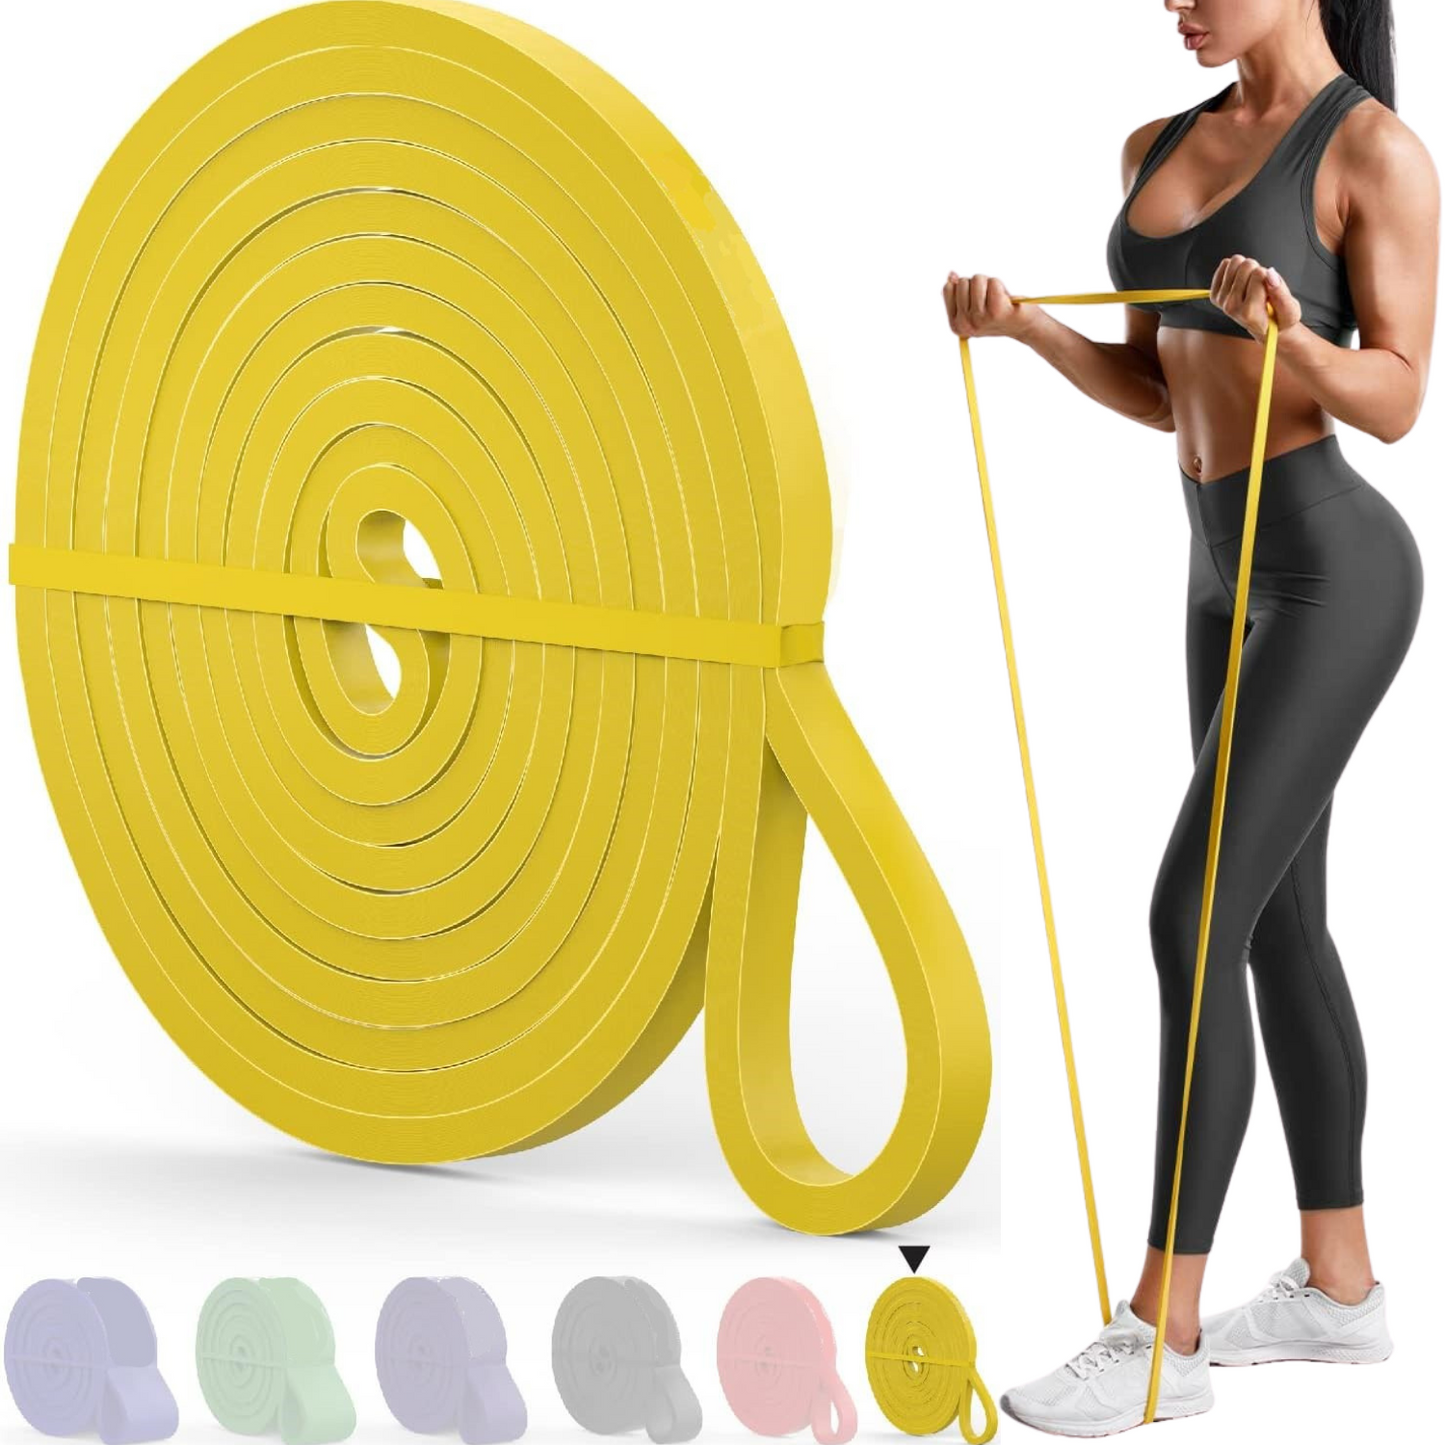 Pull up Resistance Loop Bands - Yellow - 5 to 15 Lbs